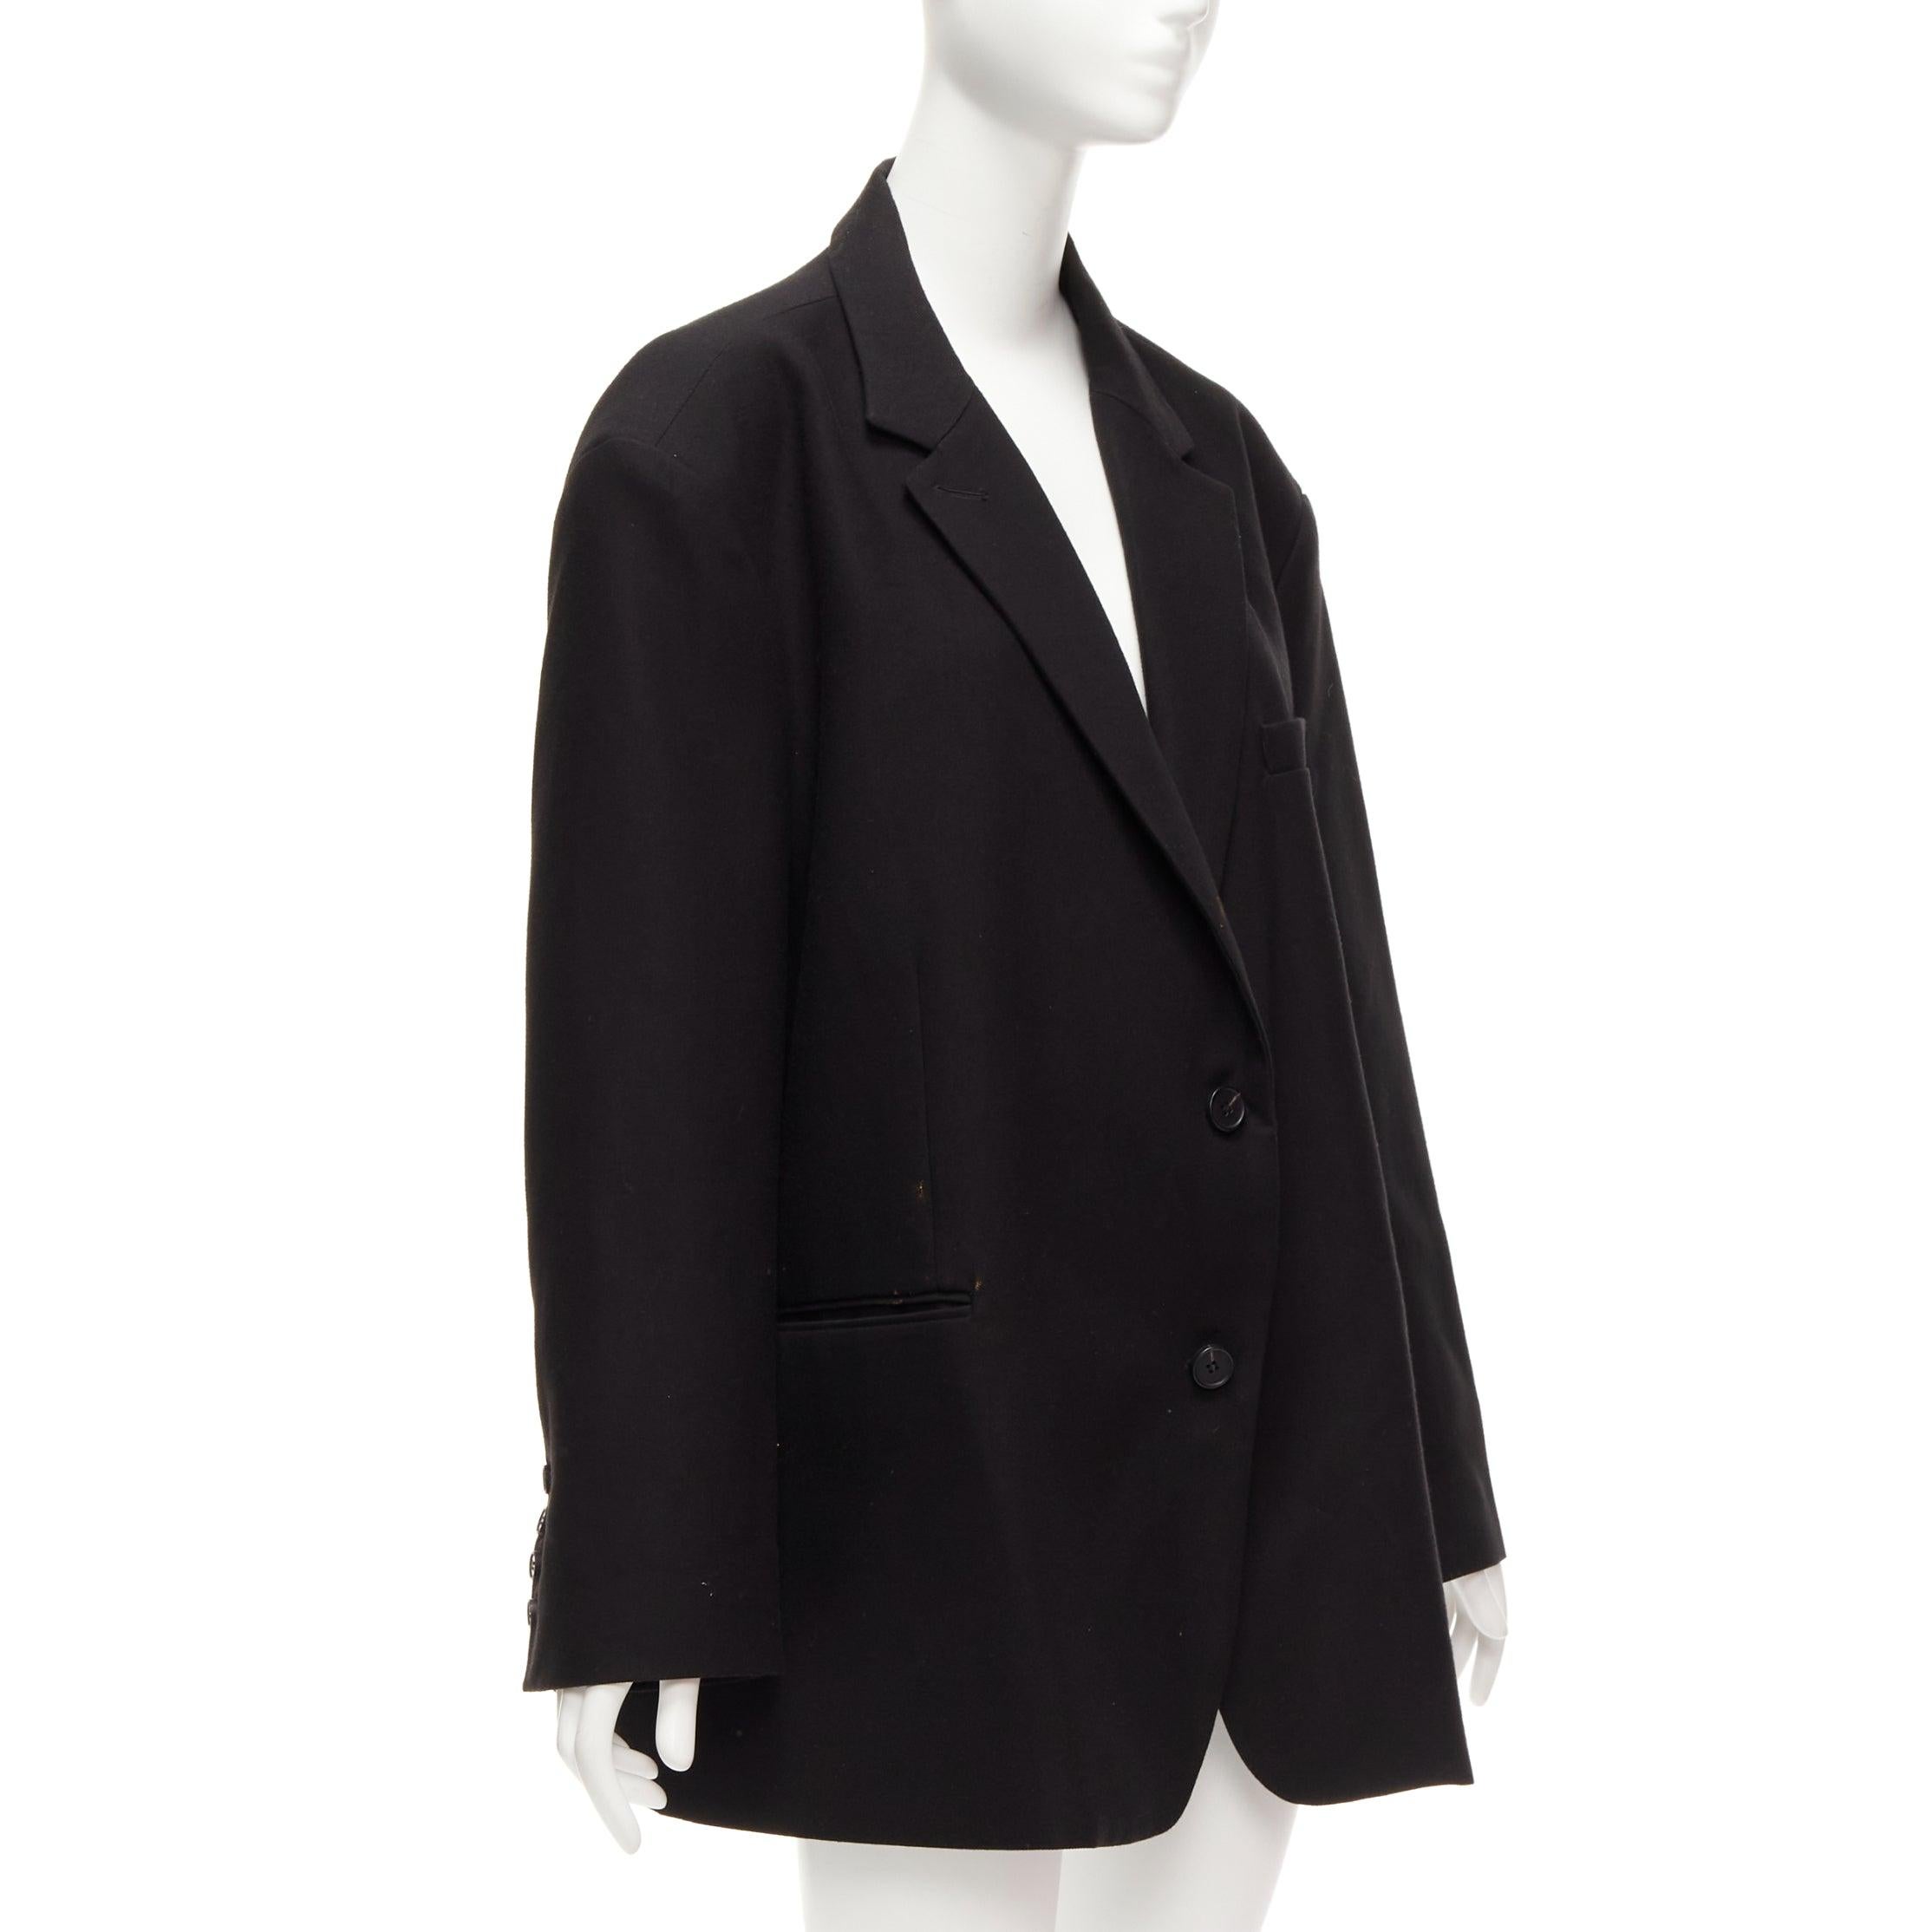 FRANKIE SHOP Bea black twill fabric oversized shoulder padded blazer
Reference: KEDG/A00343
Brand: Frankie Shop
Model: Bea
Material: Rayon, Blend
Color: Black
Pattern: Solid
Closure: Button
Lining: Black Polyester
Extra Details: Frankie Shop's Bea